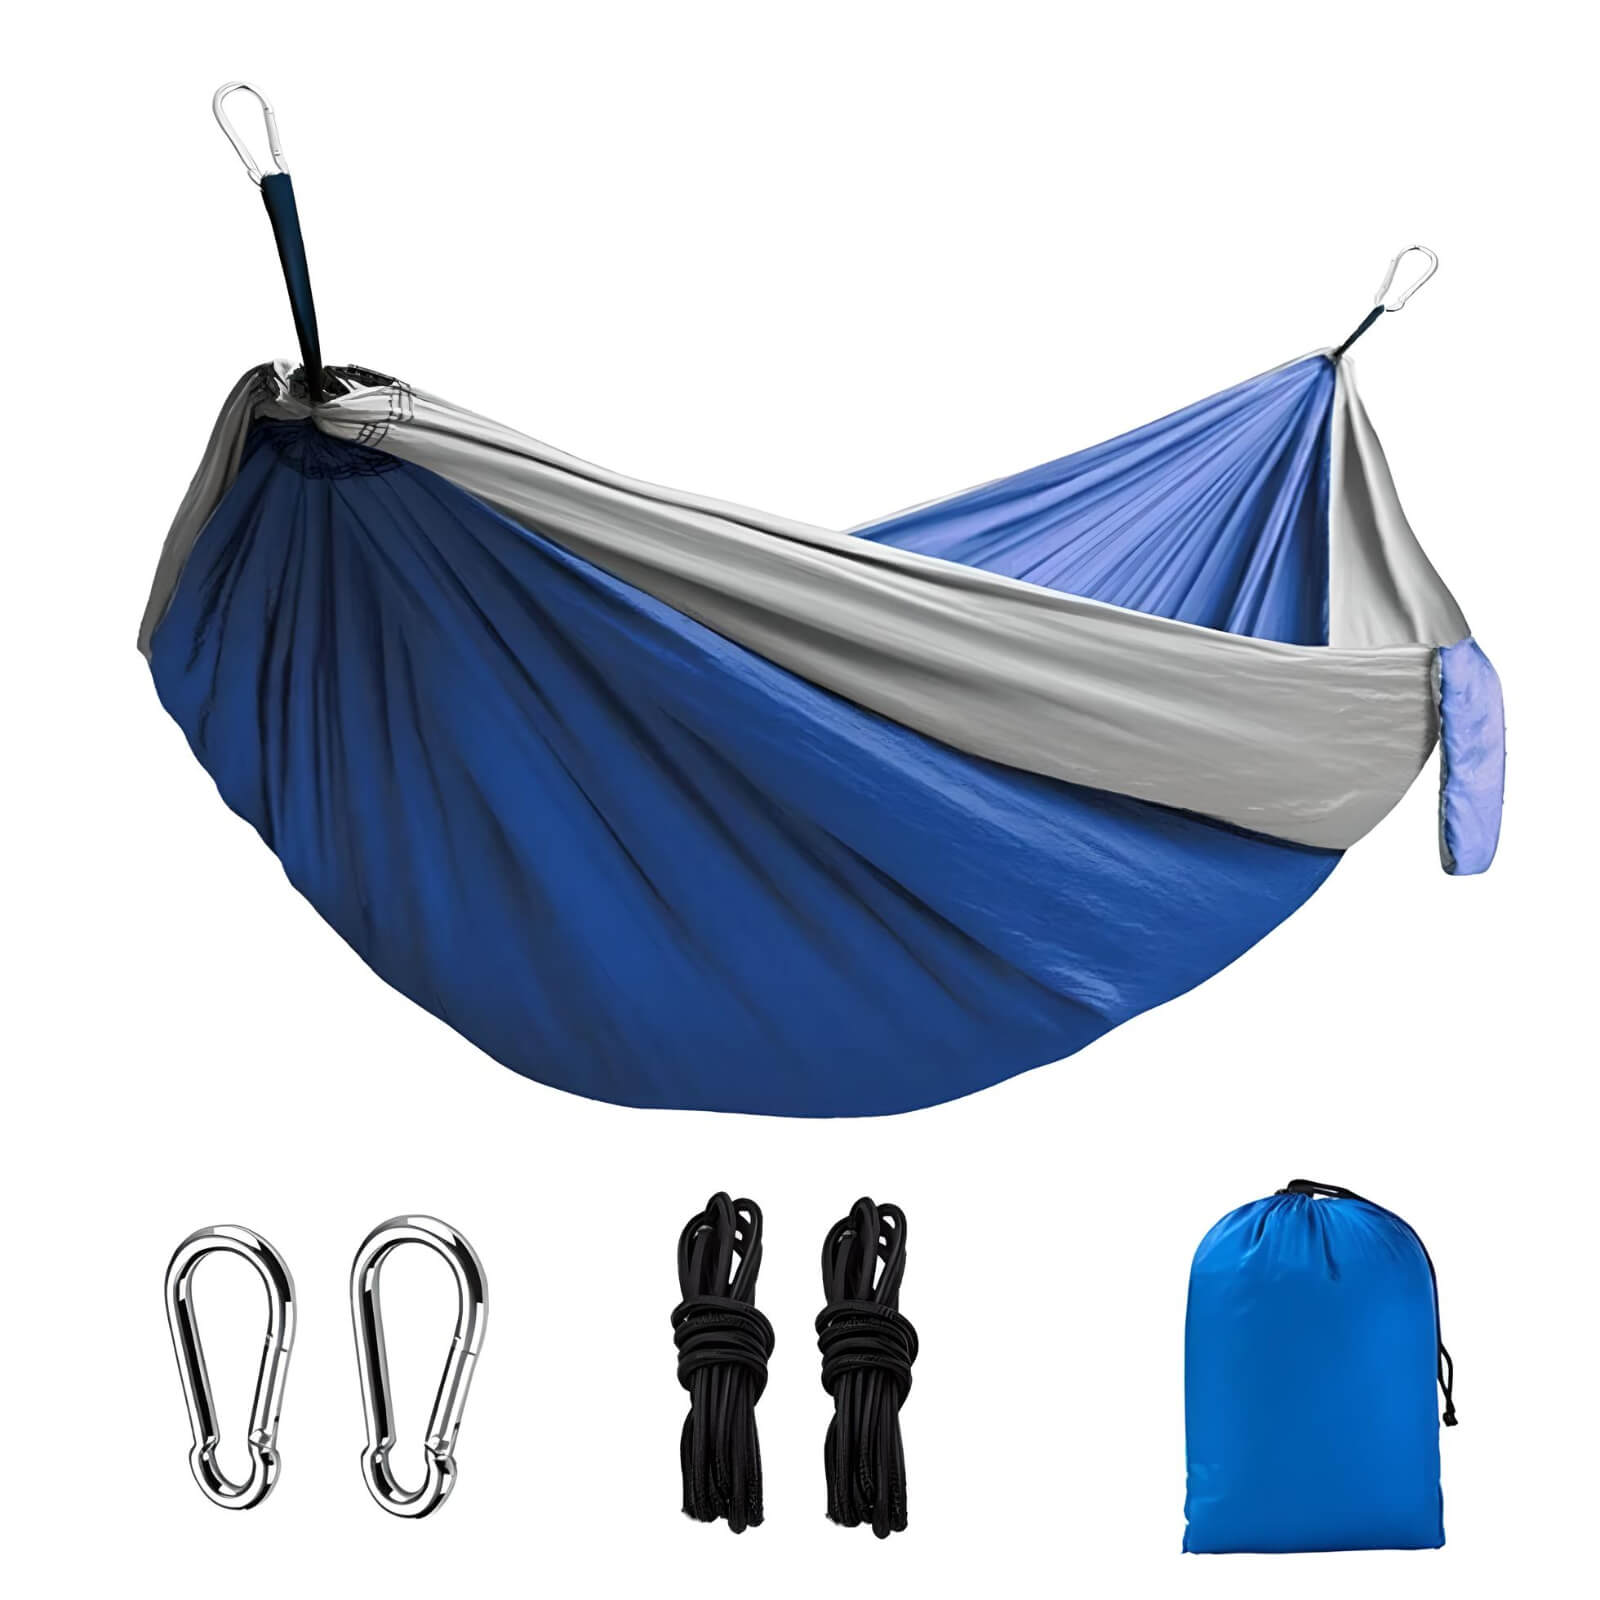 light-weight-back-packing-hammock-blue-color